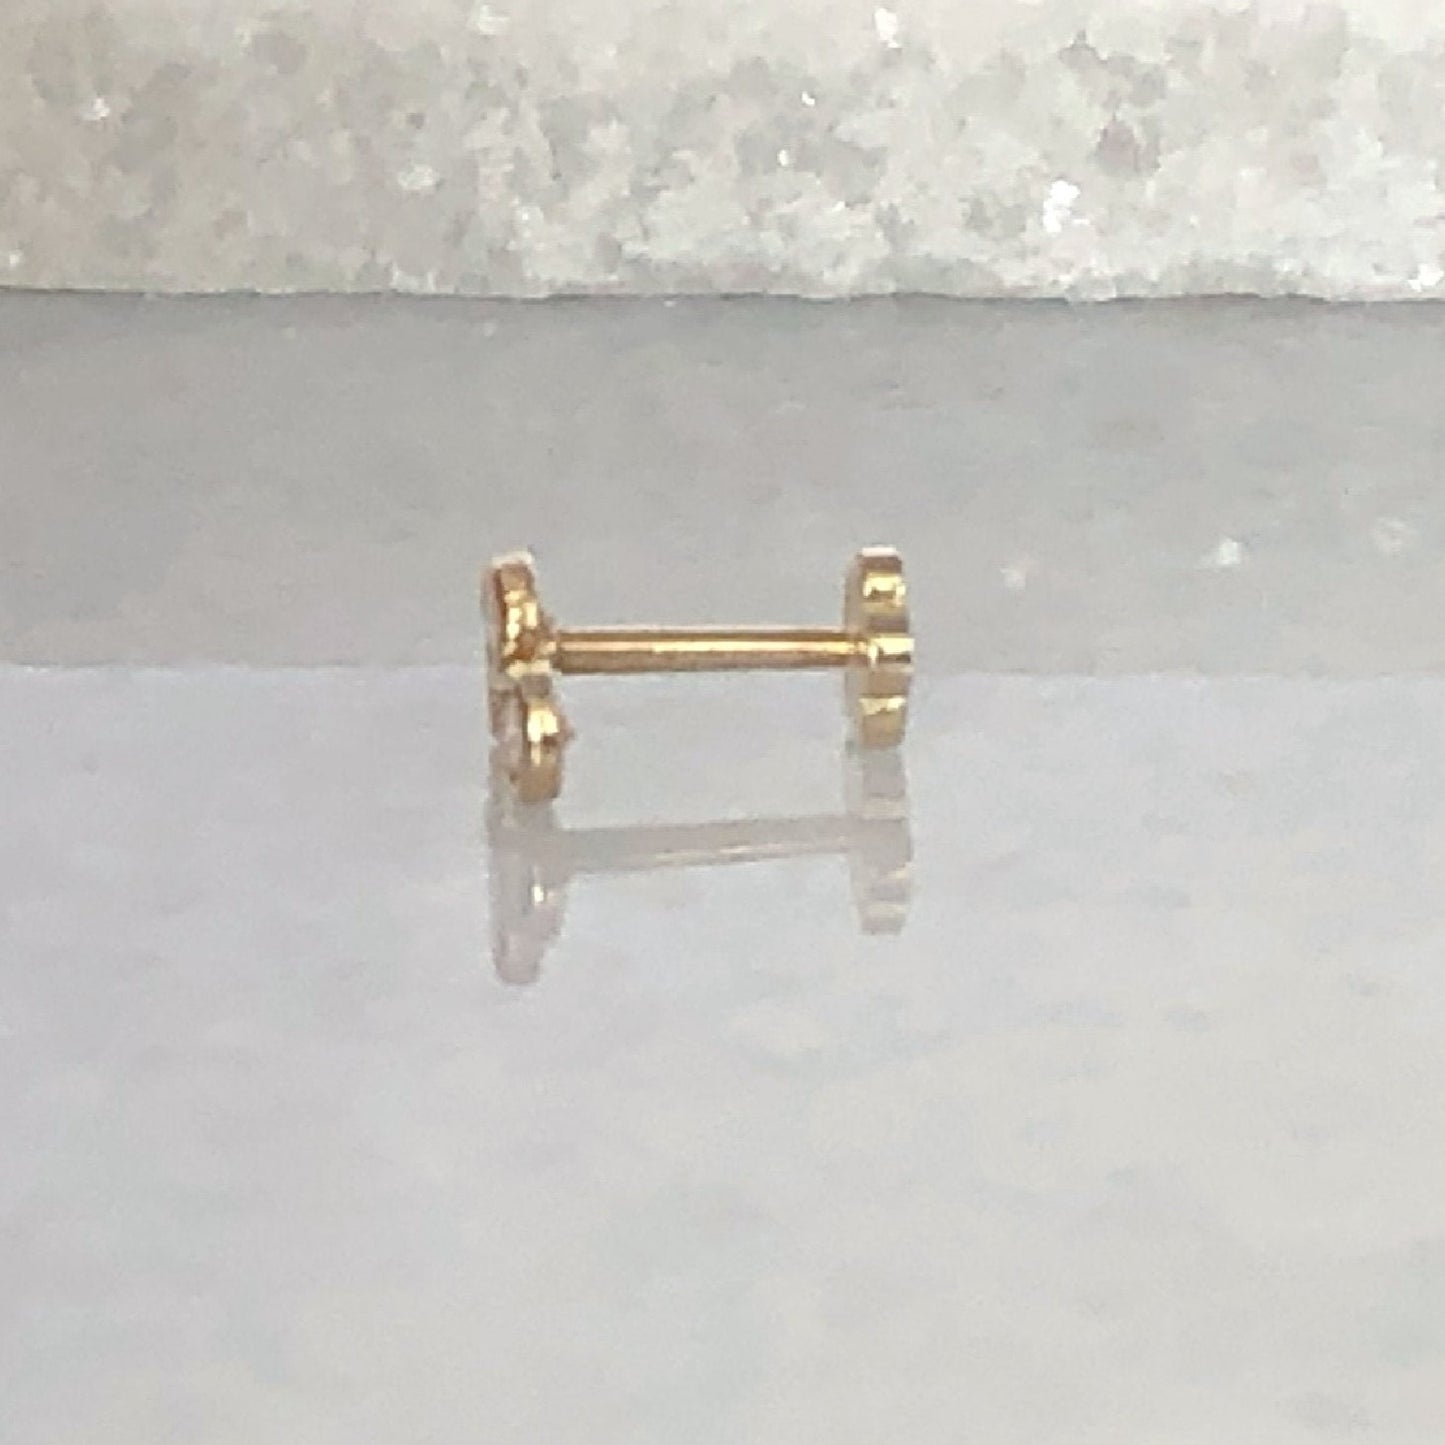 Four Stone Stud Earring | Piercing Earrings | Solid Gold Hypoallergenic Jewelry | Helix, Tragus, Cartilage | Two of Most Fine Jewelry